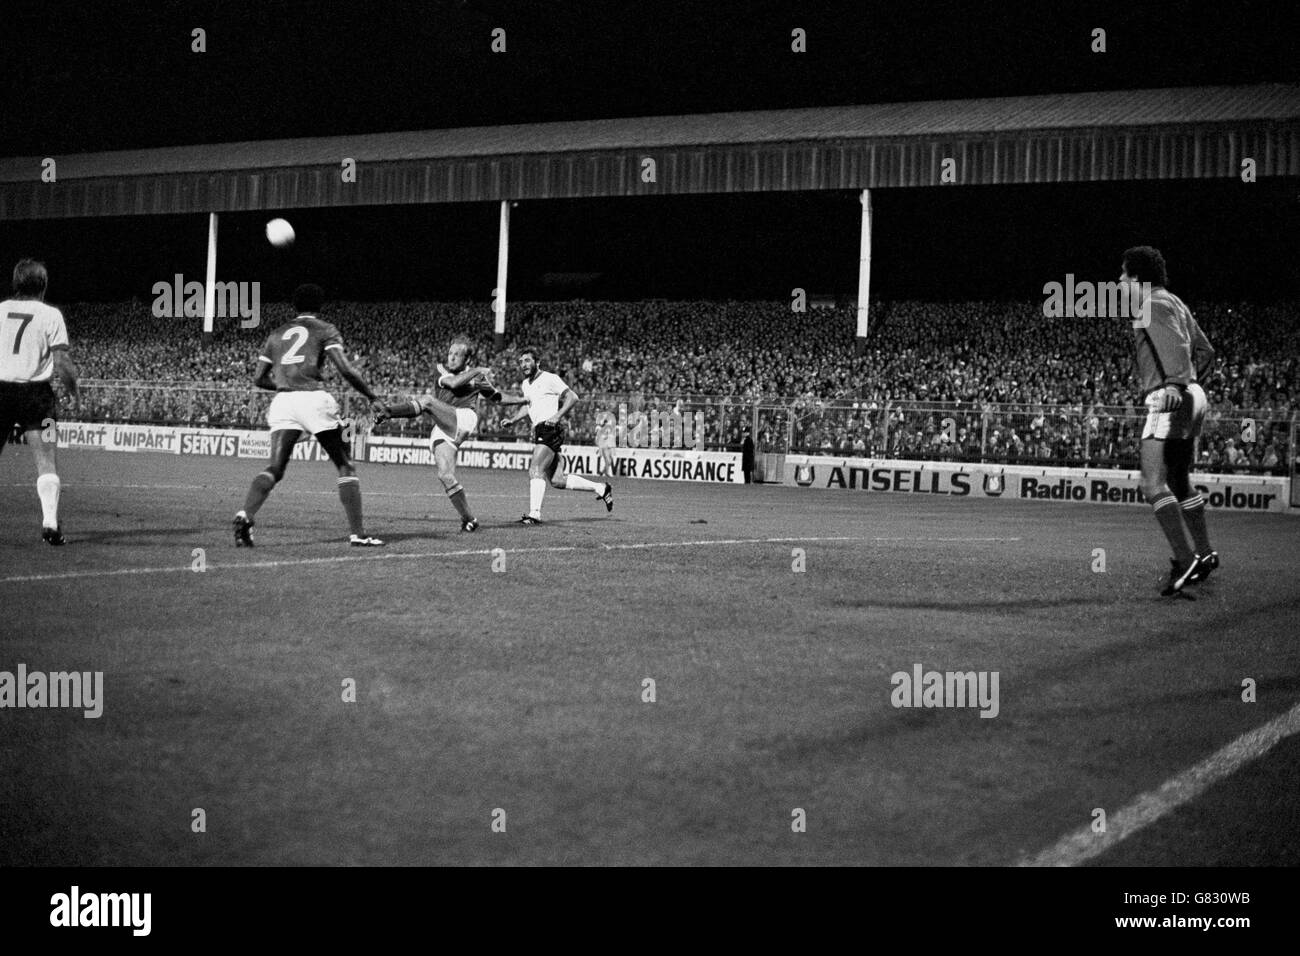 Nottingham Forest's Archie Gemmill (c) hacks the ball clear, watched by teammates Peter Shilton (r) and Viv Anderson (second l), and Liverpool's Kenny Dalglish (l) and Alan Kennedy (r) Stock Photo